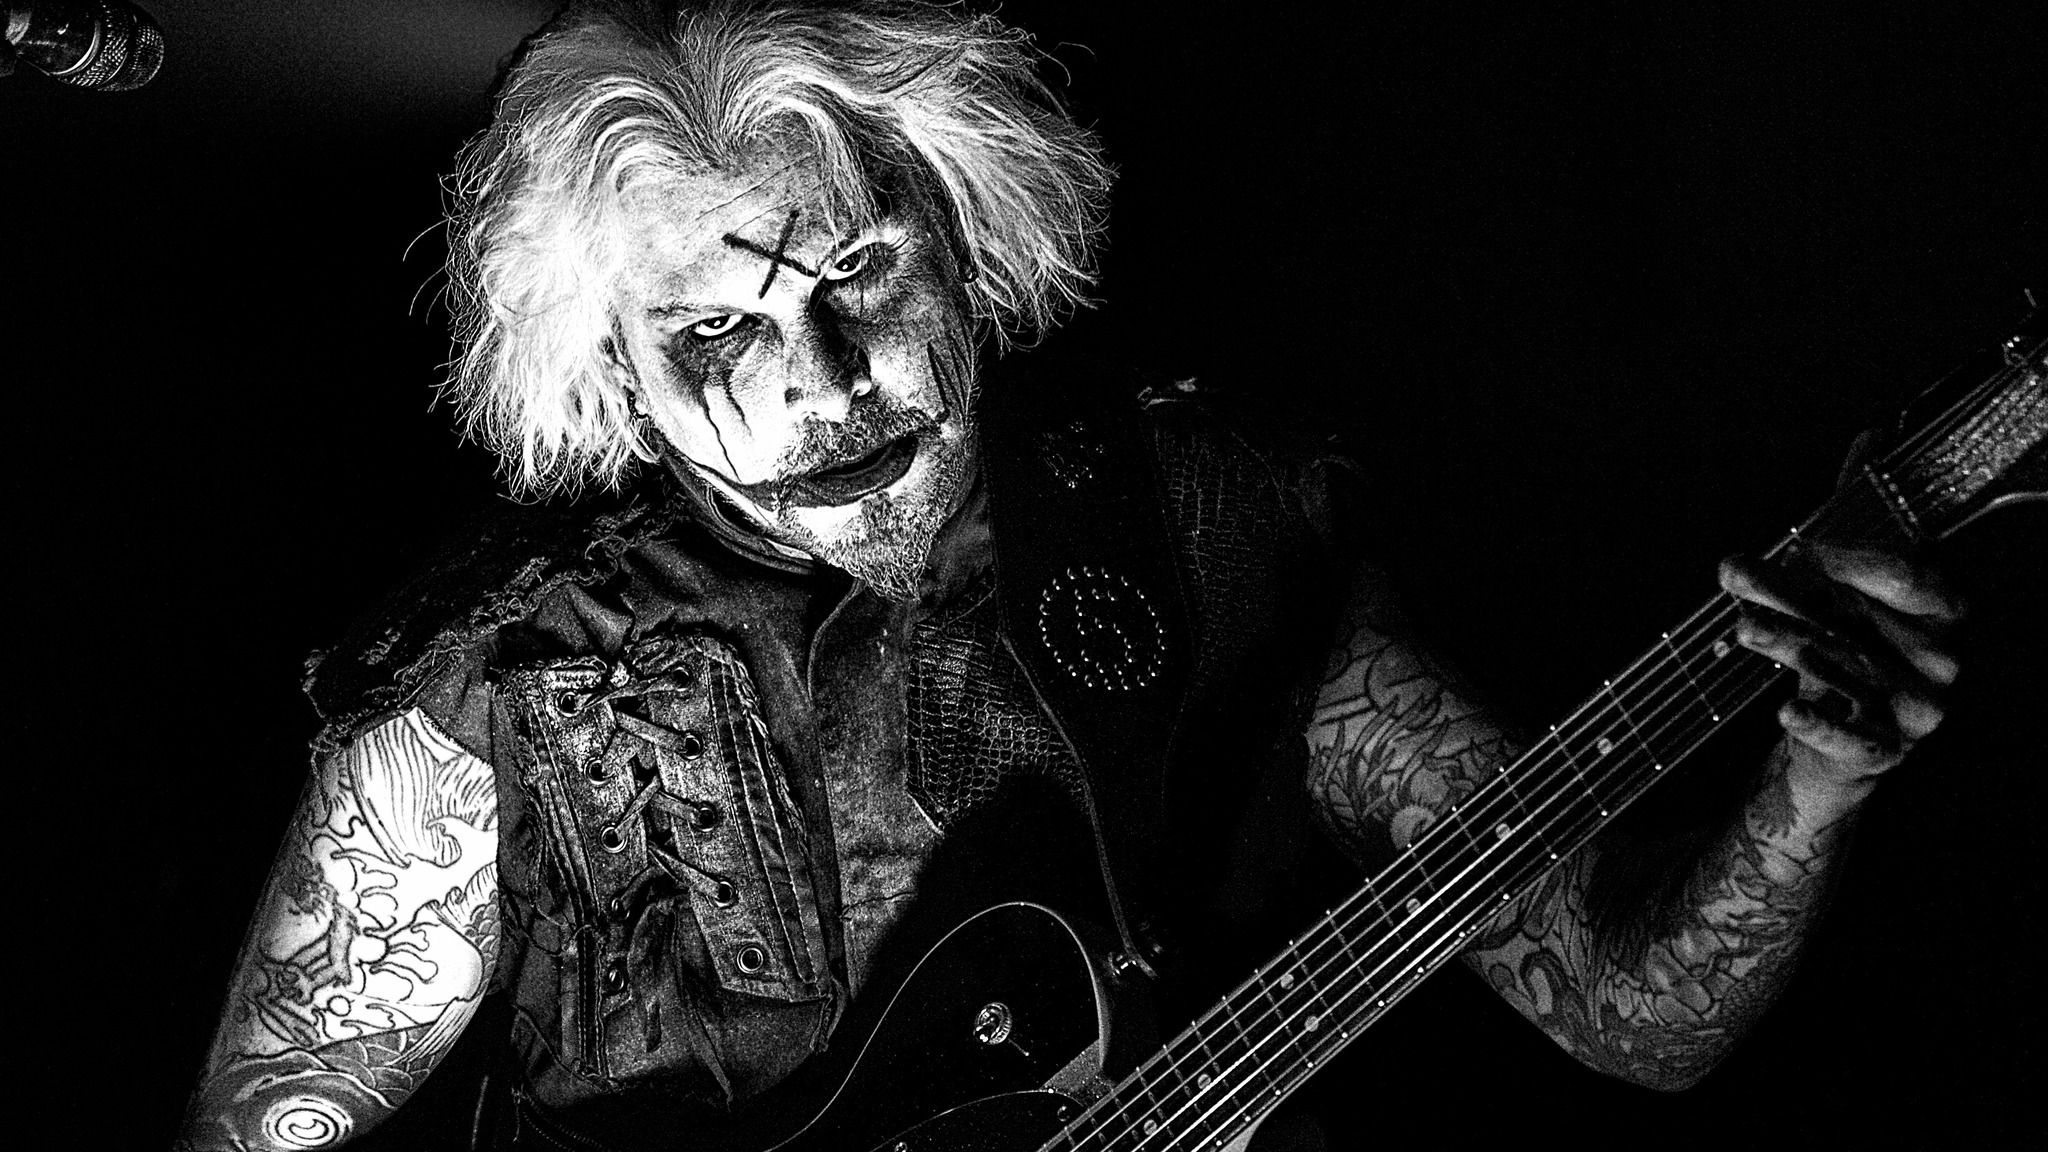 JOHN 5 AND THE ARISTOCRATS TEAM UP FOR CO- HEADLINE LOS ANGELES SHOW JOHN 5 and t...